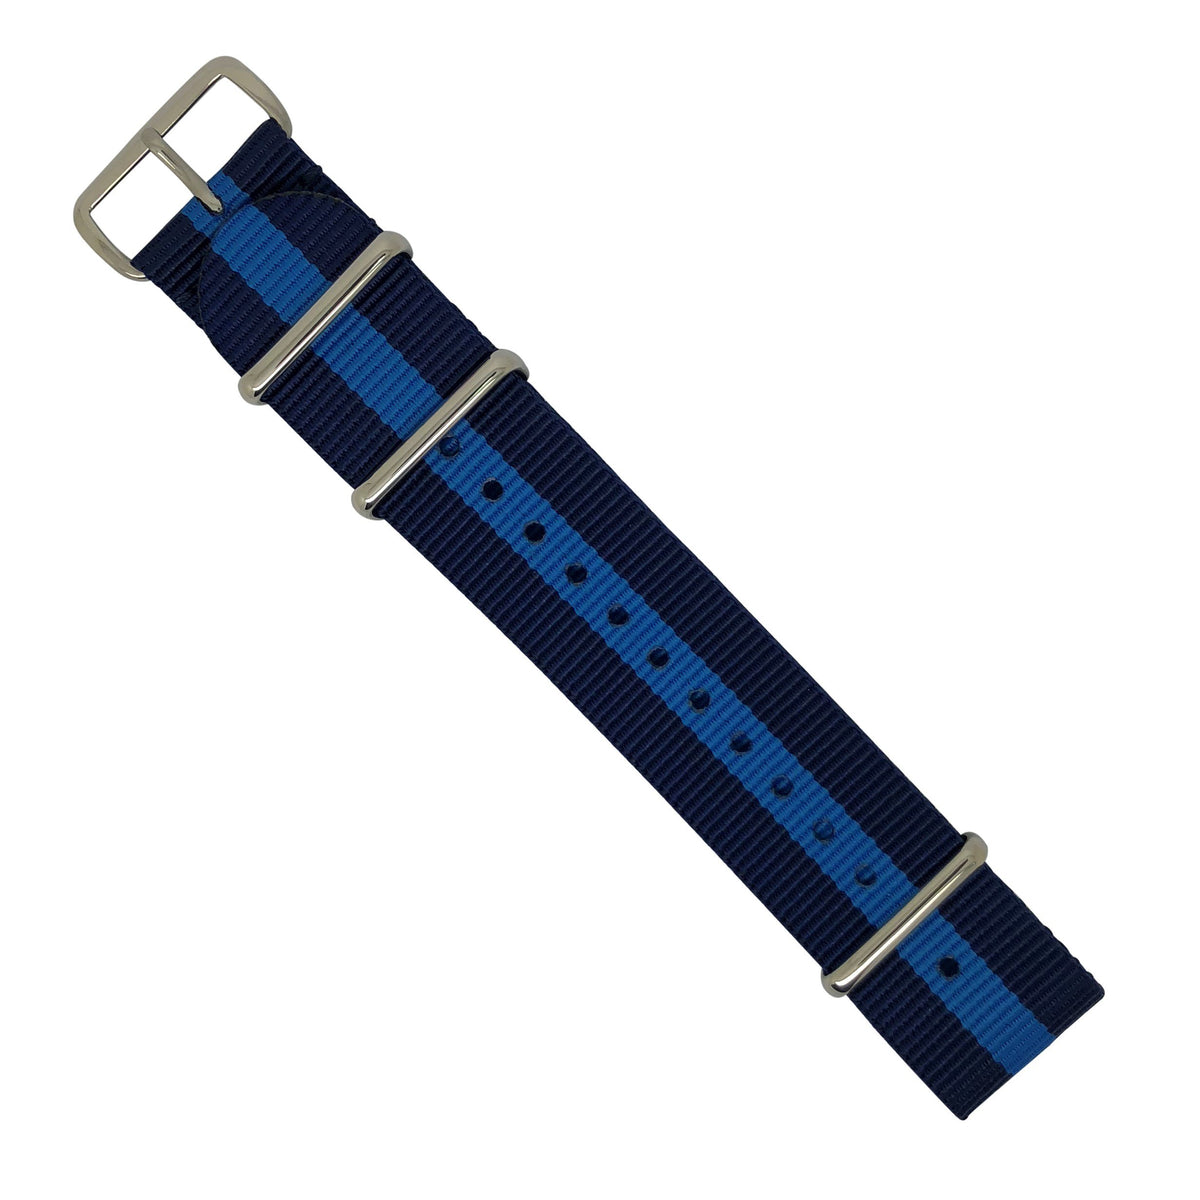 Premium Nato Strap in Navy Blue with Polished Silver Buckle (22mm) - Nomad Watch Works Malaysia